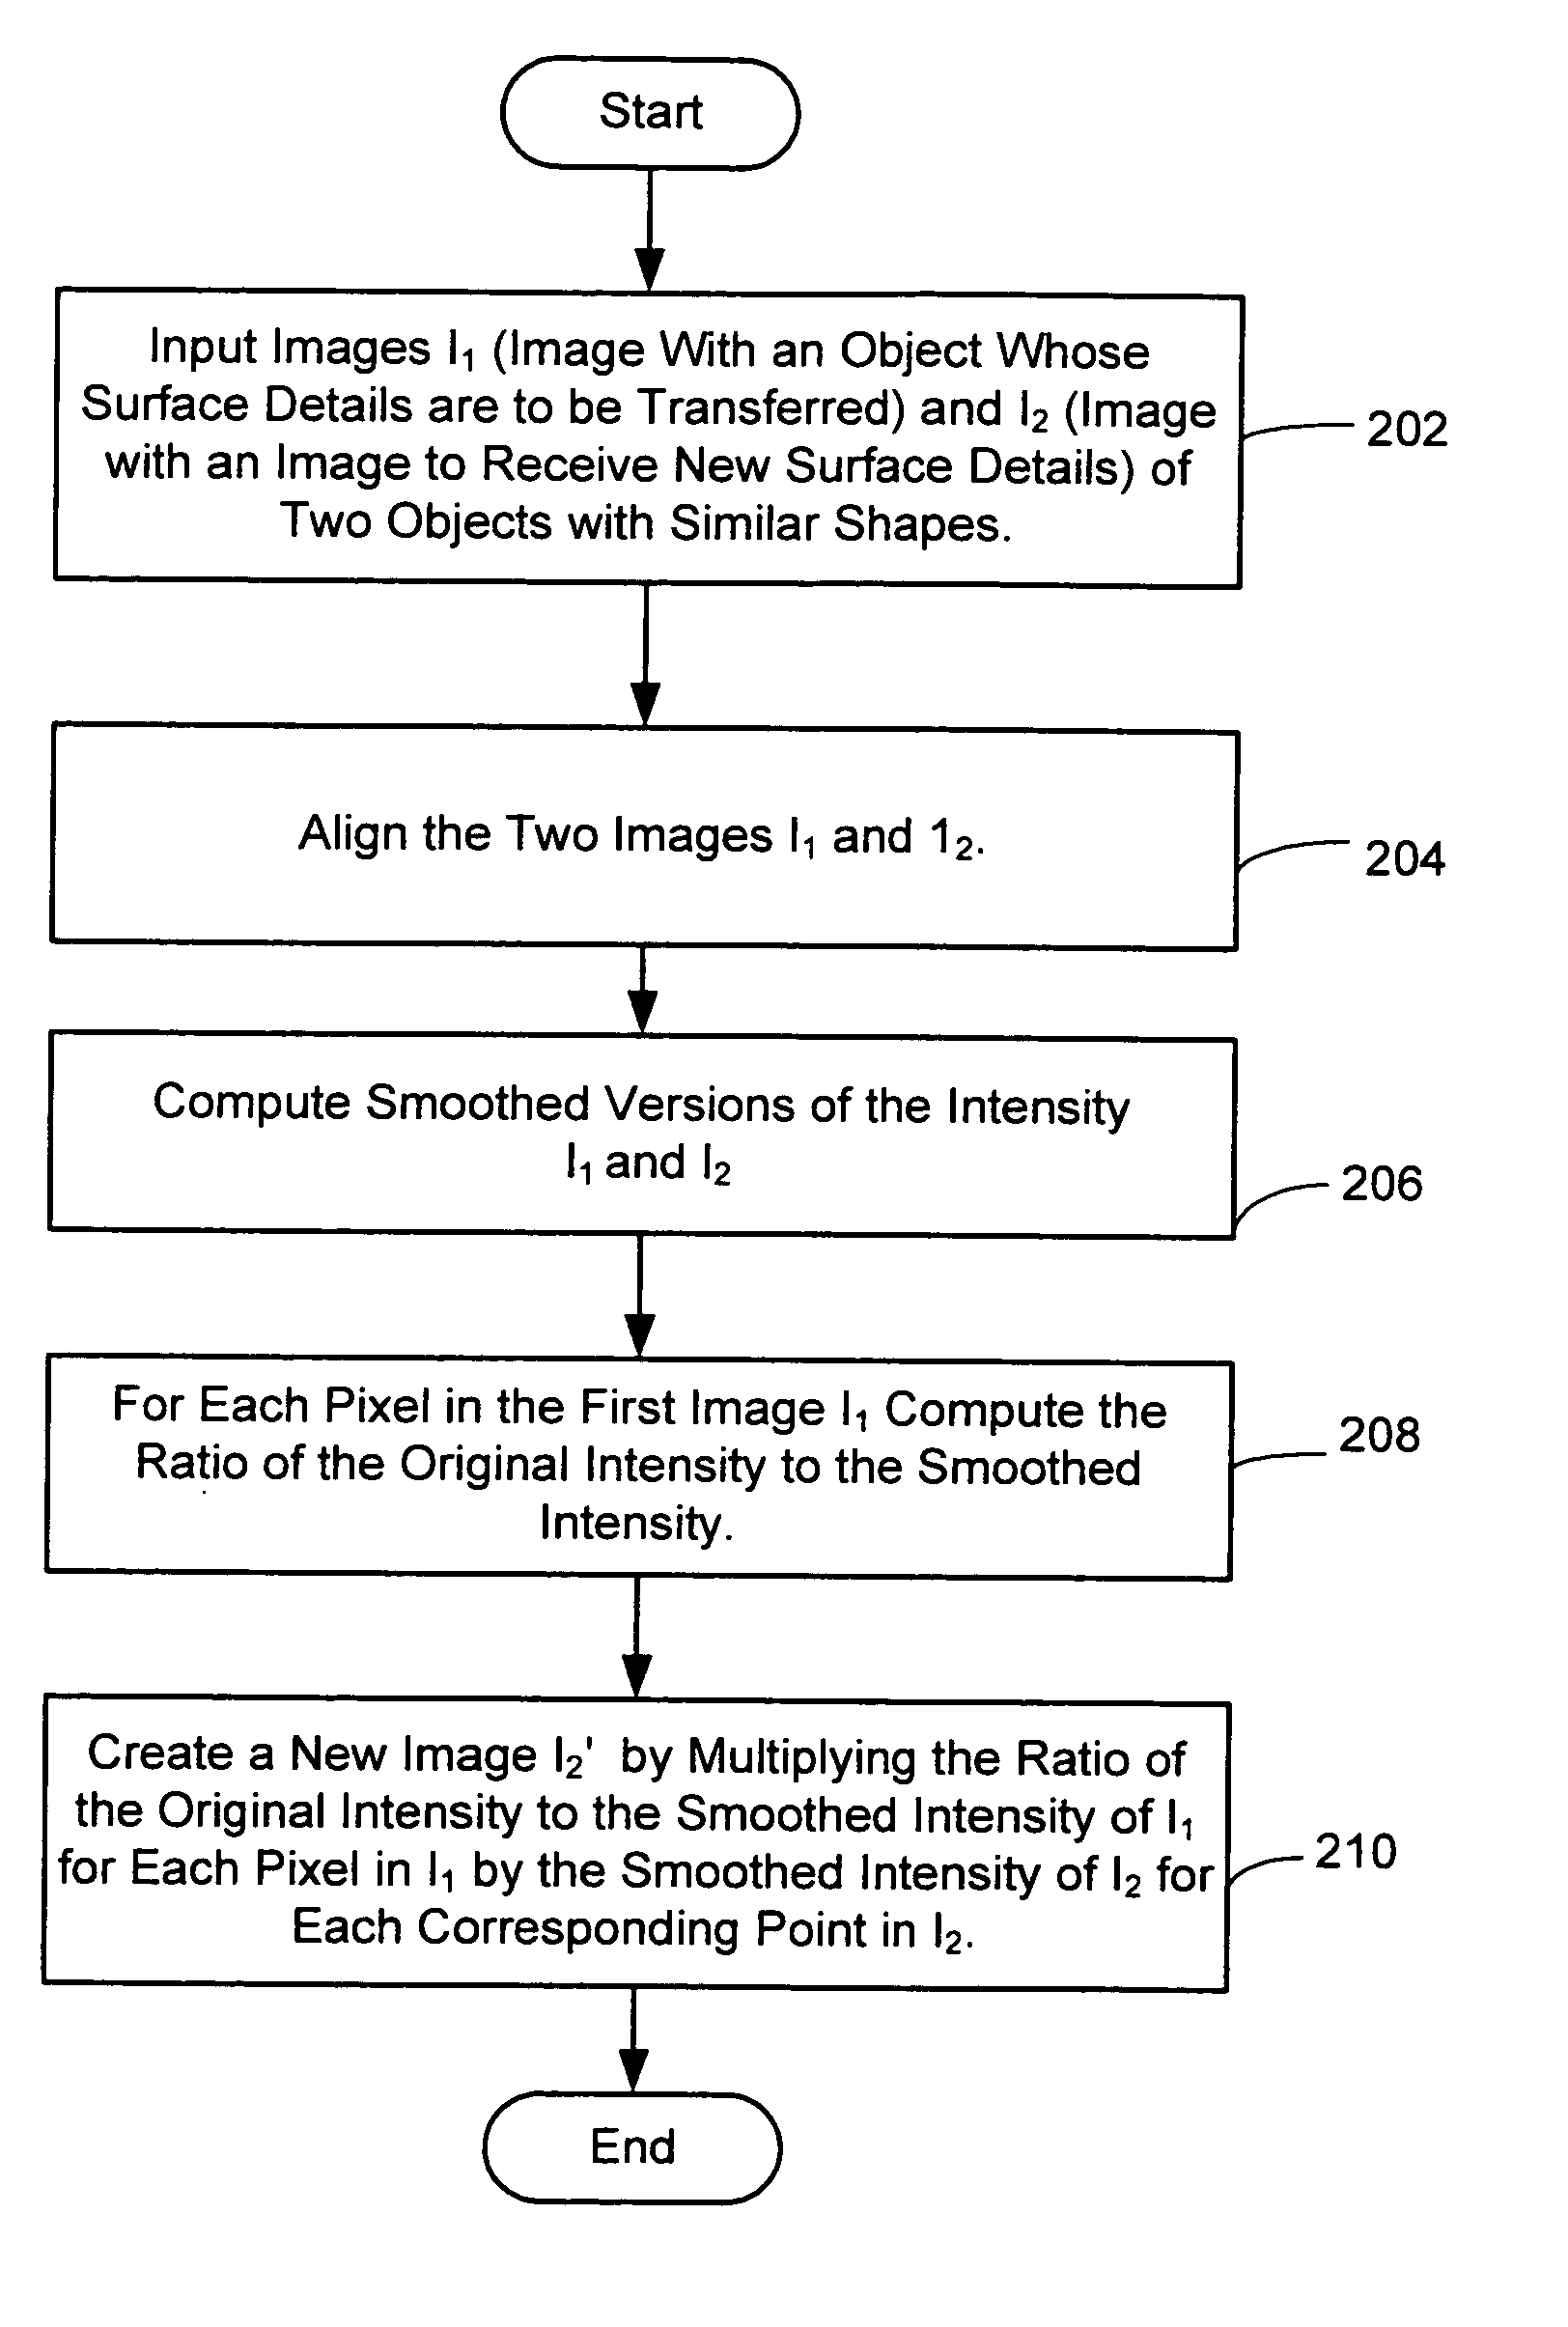 System and method for image-based surface detail transfer